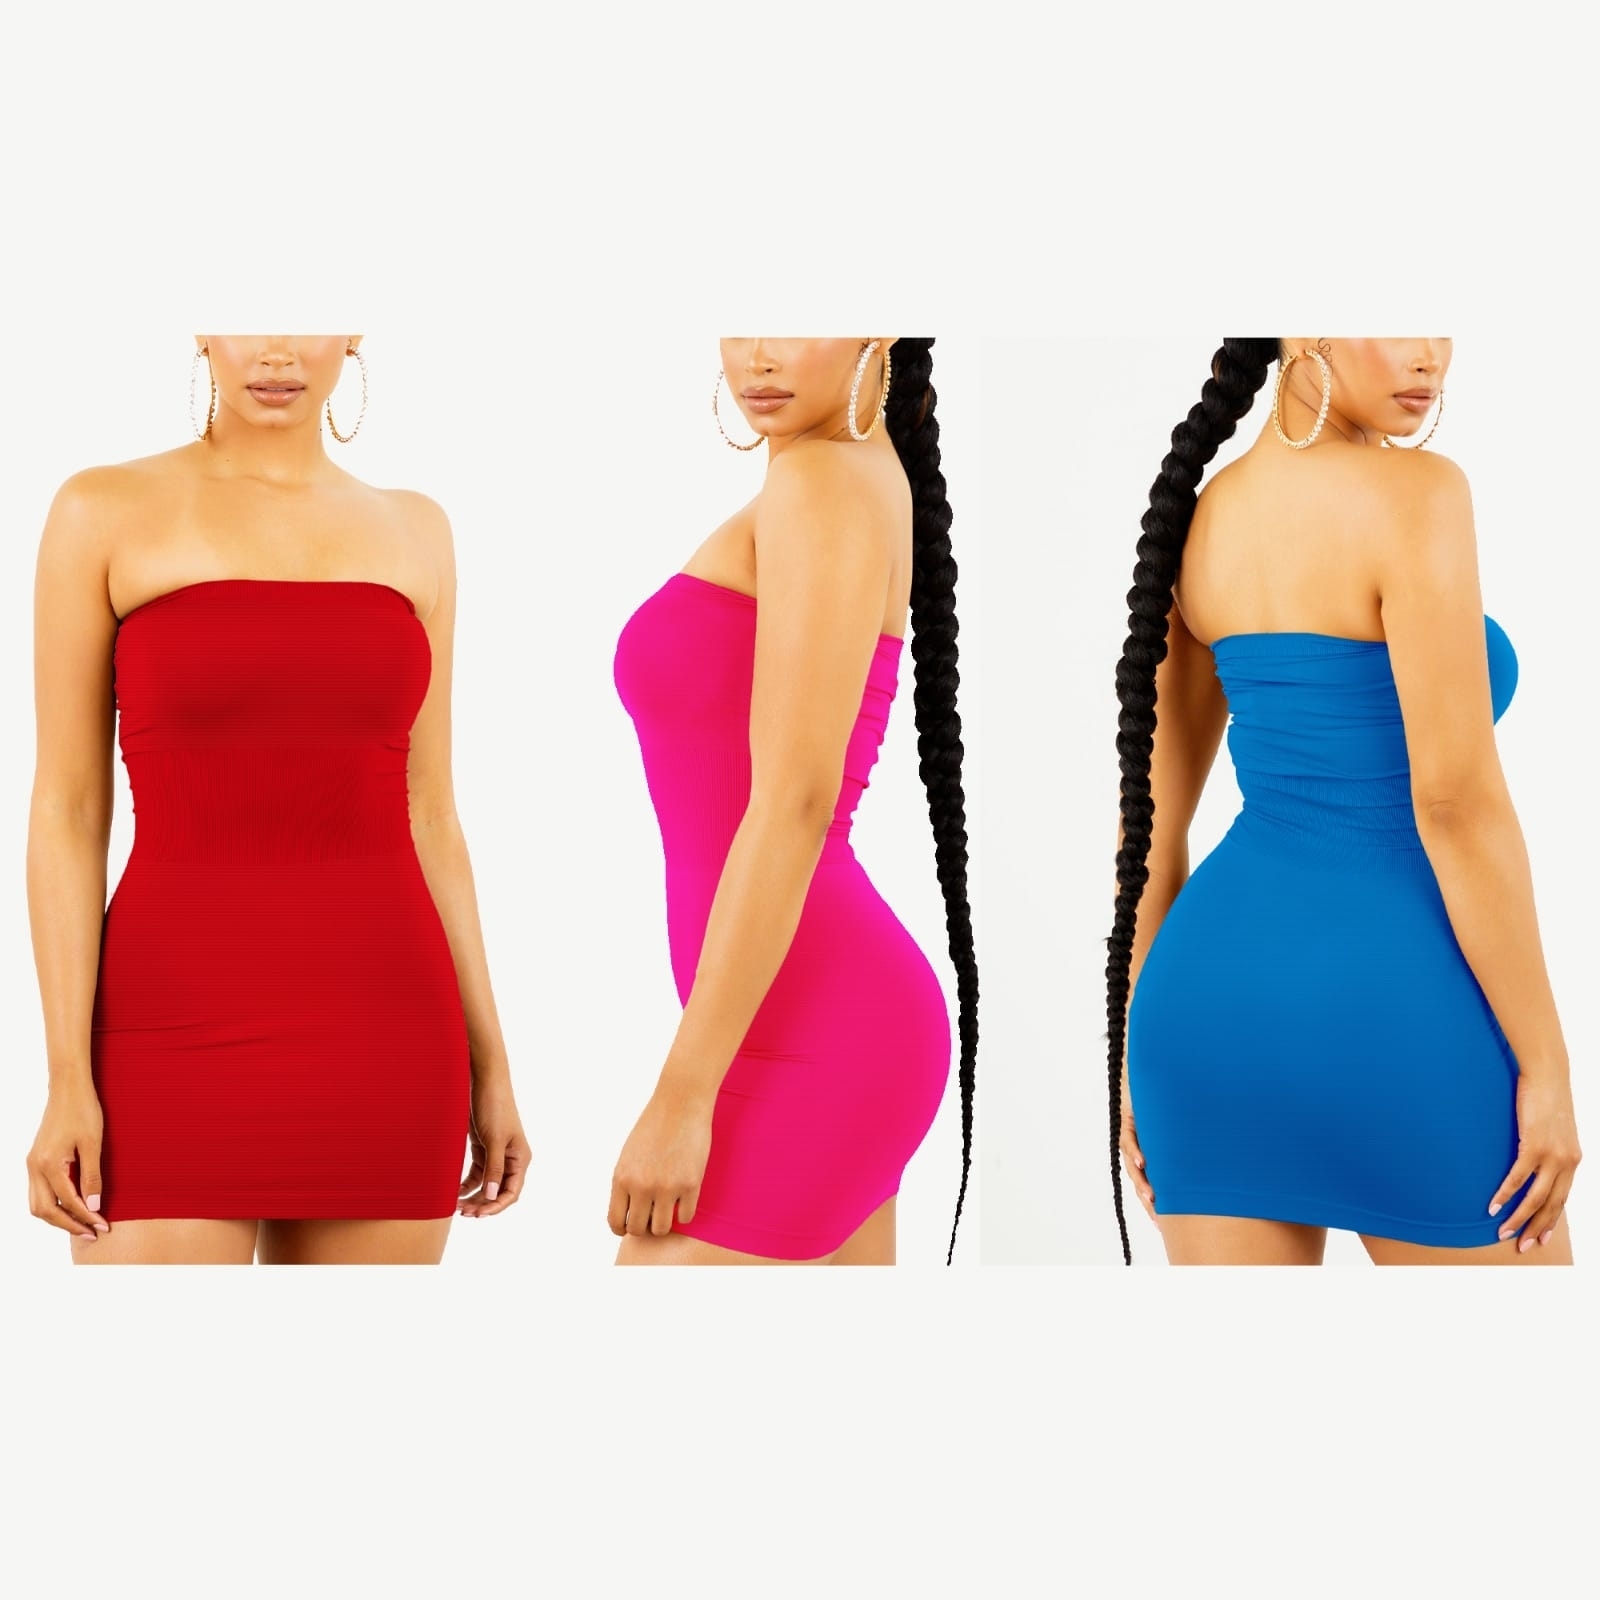 2-Pack Women's Strapless Stretchy Tight Fit Seamless Body Con Mini Tube Top Dress - PINK, 2XL